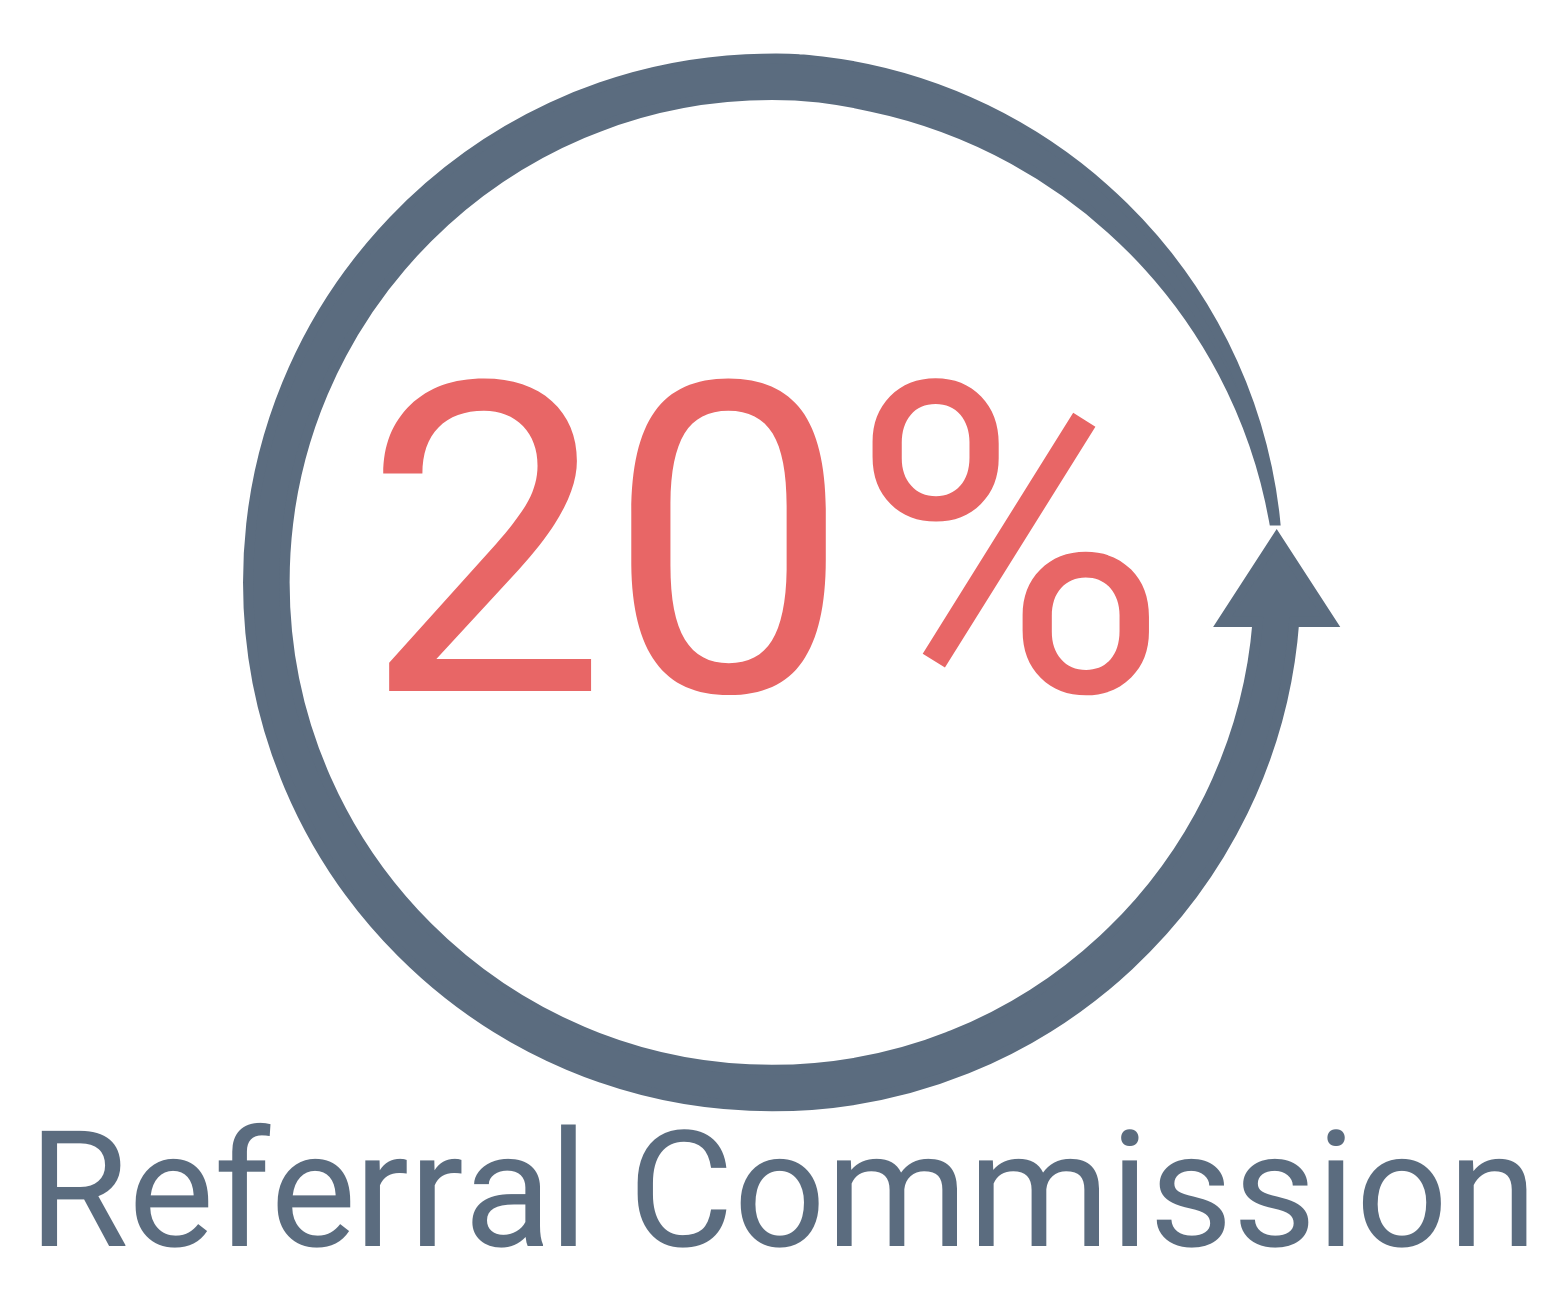 20% referral commission